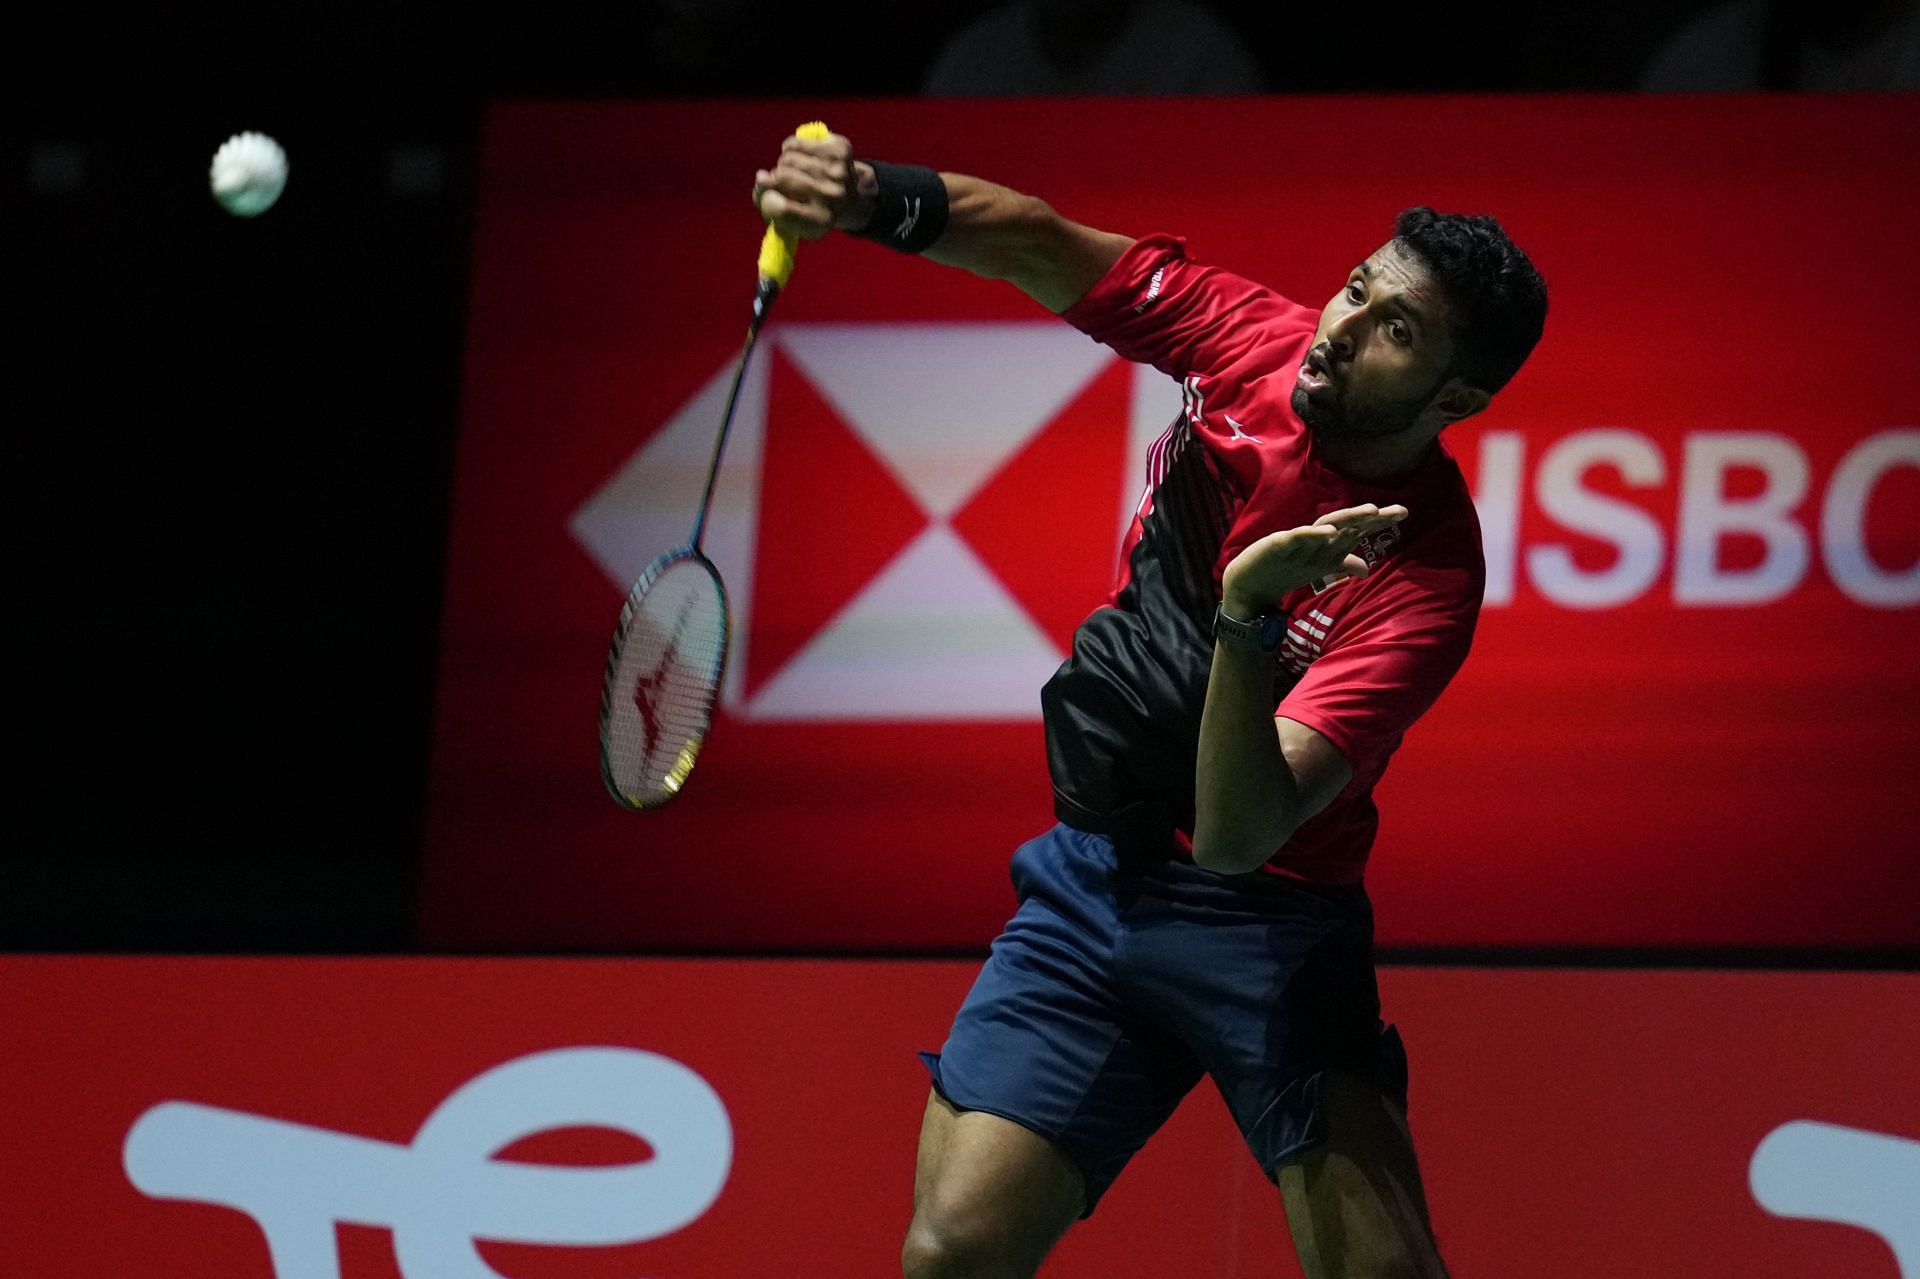 BWF World Championships 2023 HS Prannoy vs Kunlavut Vitidsarn, head-to-head, prediction, where to watch and live streaming details